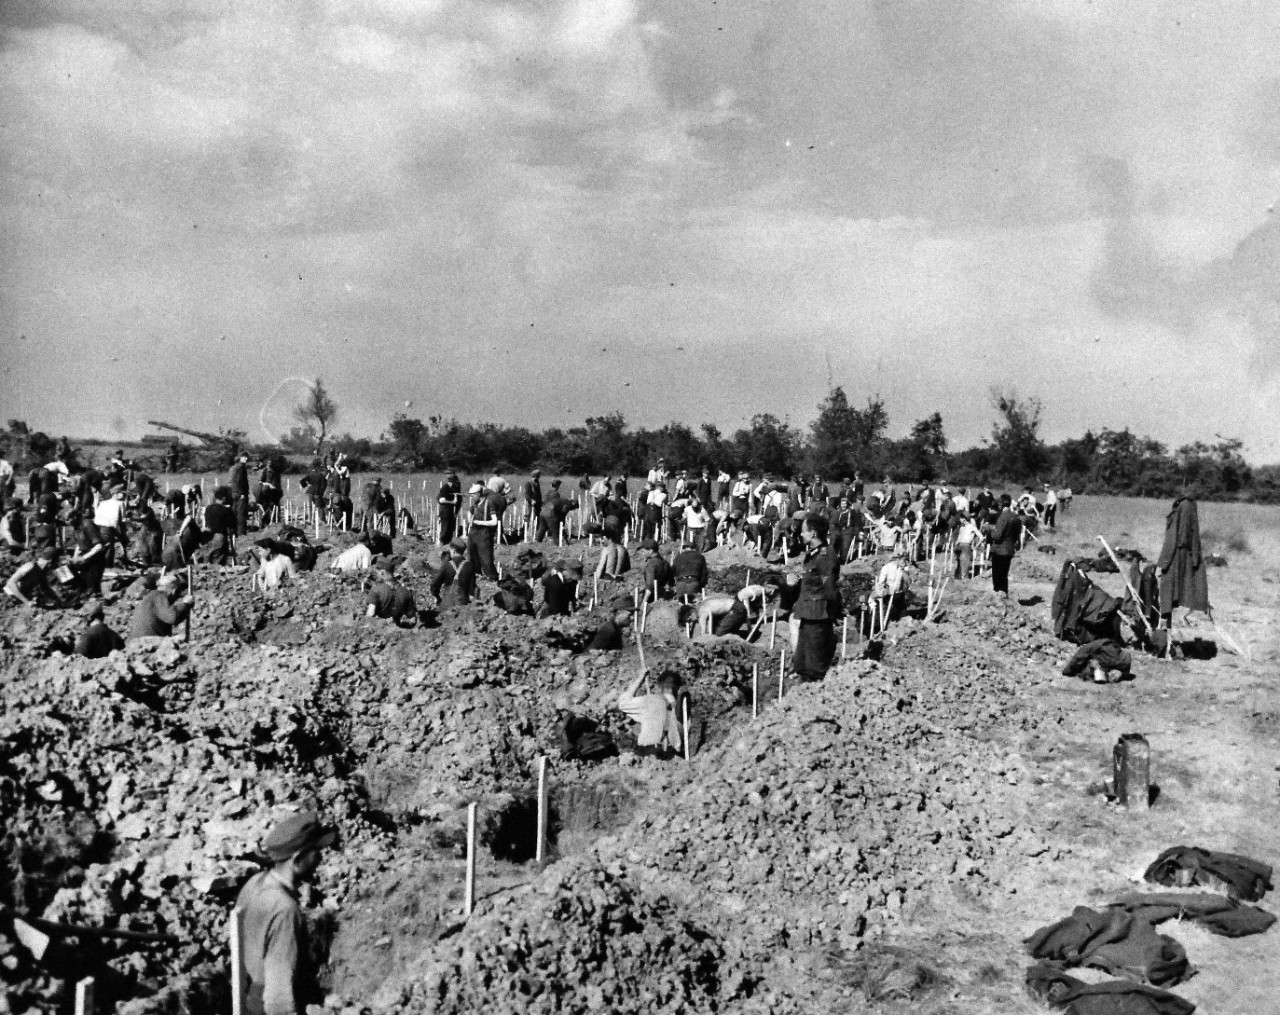 80-G-285230:  Normandy Invasion, German Prisoners, June 1944. German prisoners, captured during invasion of Normandy, France, digging graves overlooking Dog Red beach.   Photograph released November 7, 1944.  U.S. Navy photograph, now in the collections of the National Archives.  (2016/03/15).